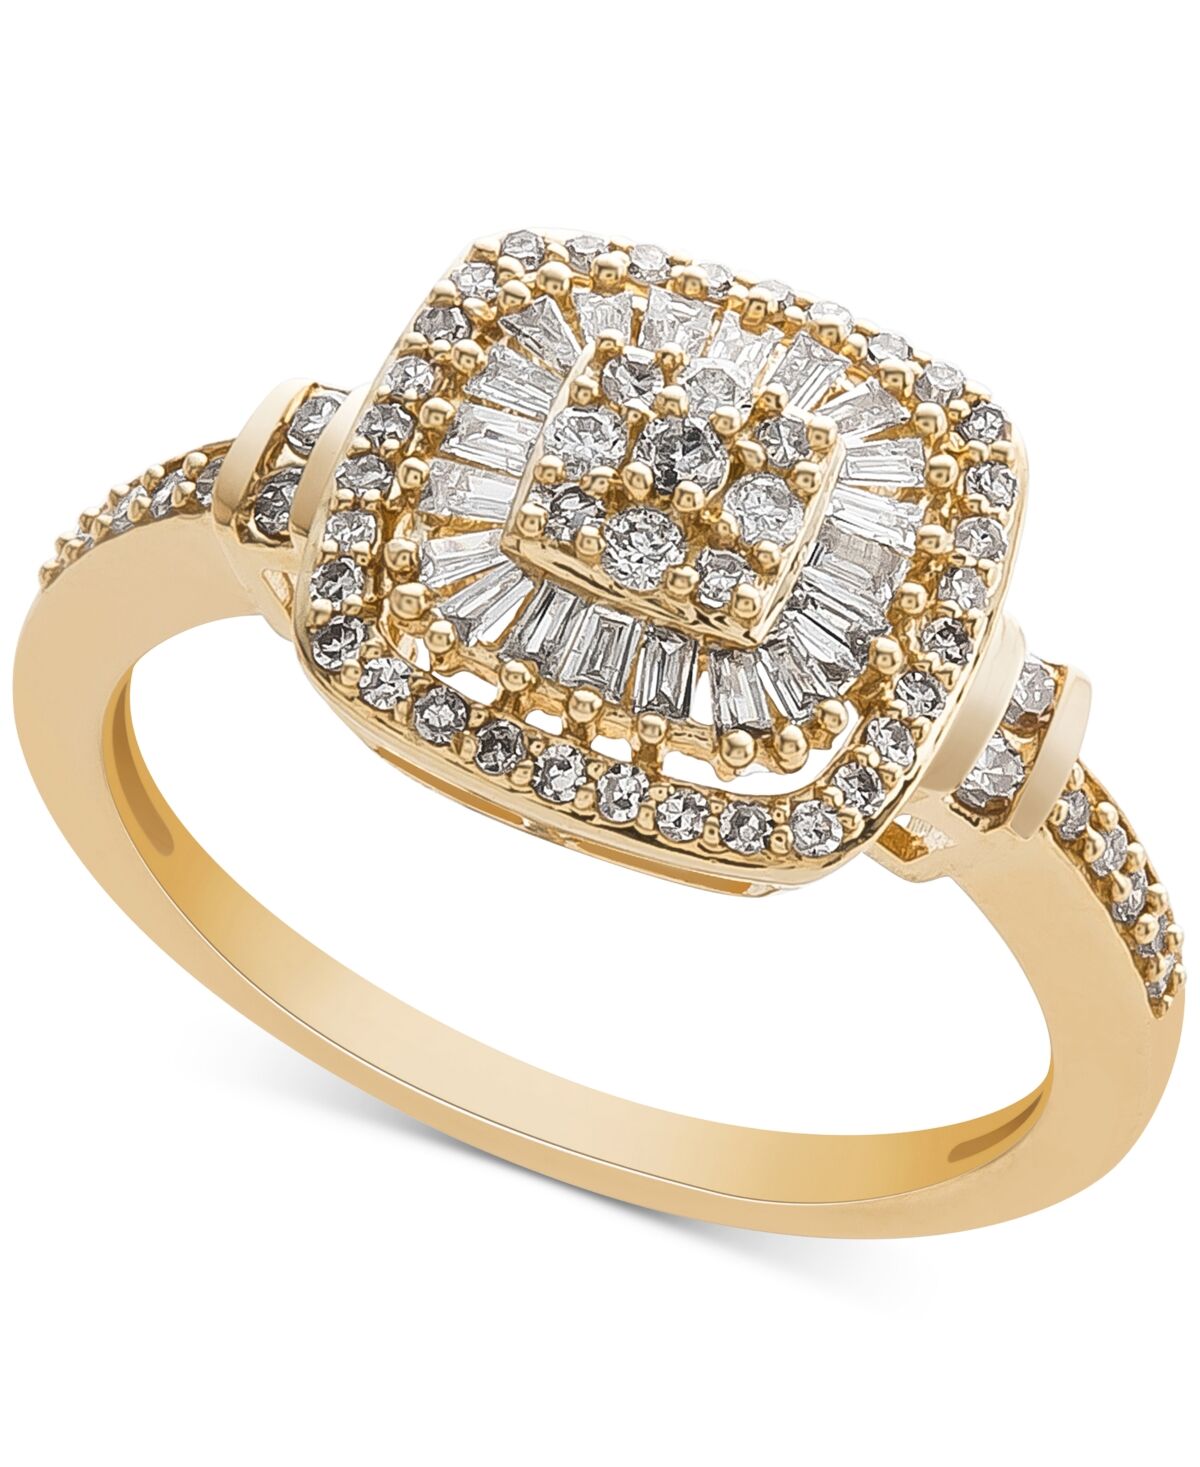 Macy's Diamond Vintage-Inspired Ring (1/2 ct. t.w.) in 14k White, Yellow or Rose Gold - Yellow Gold